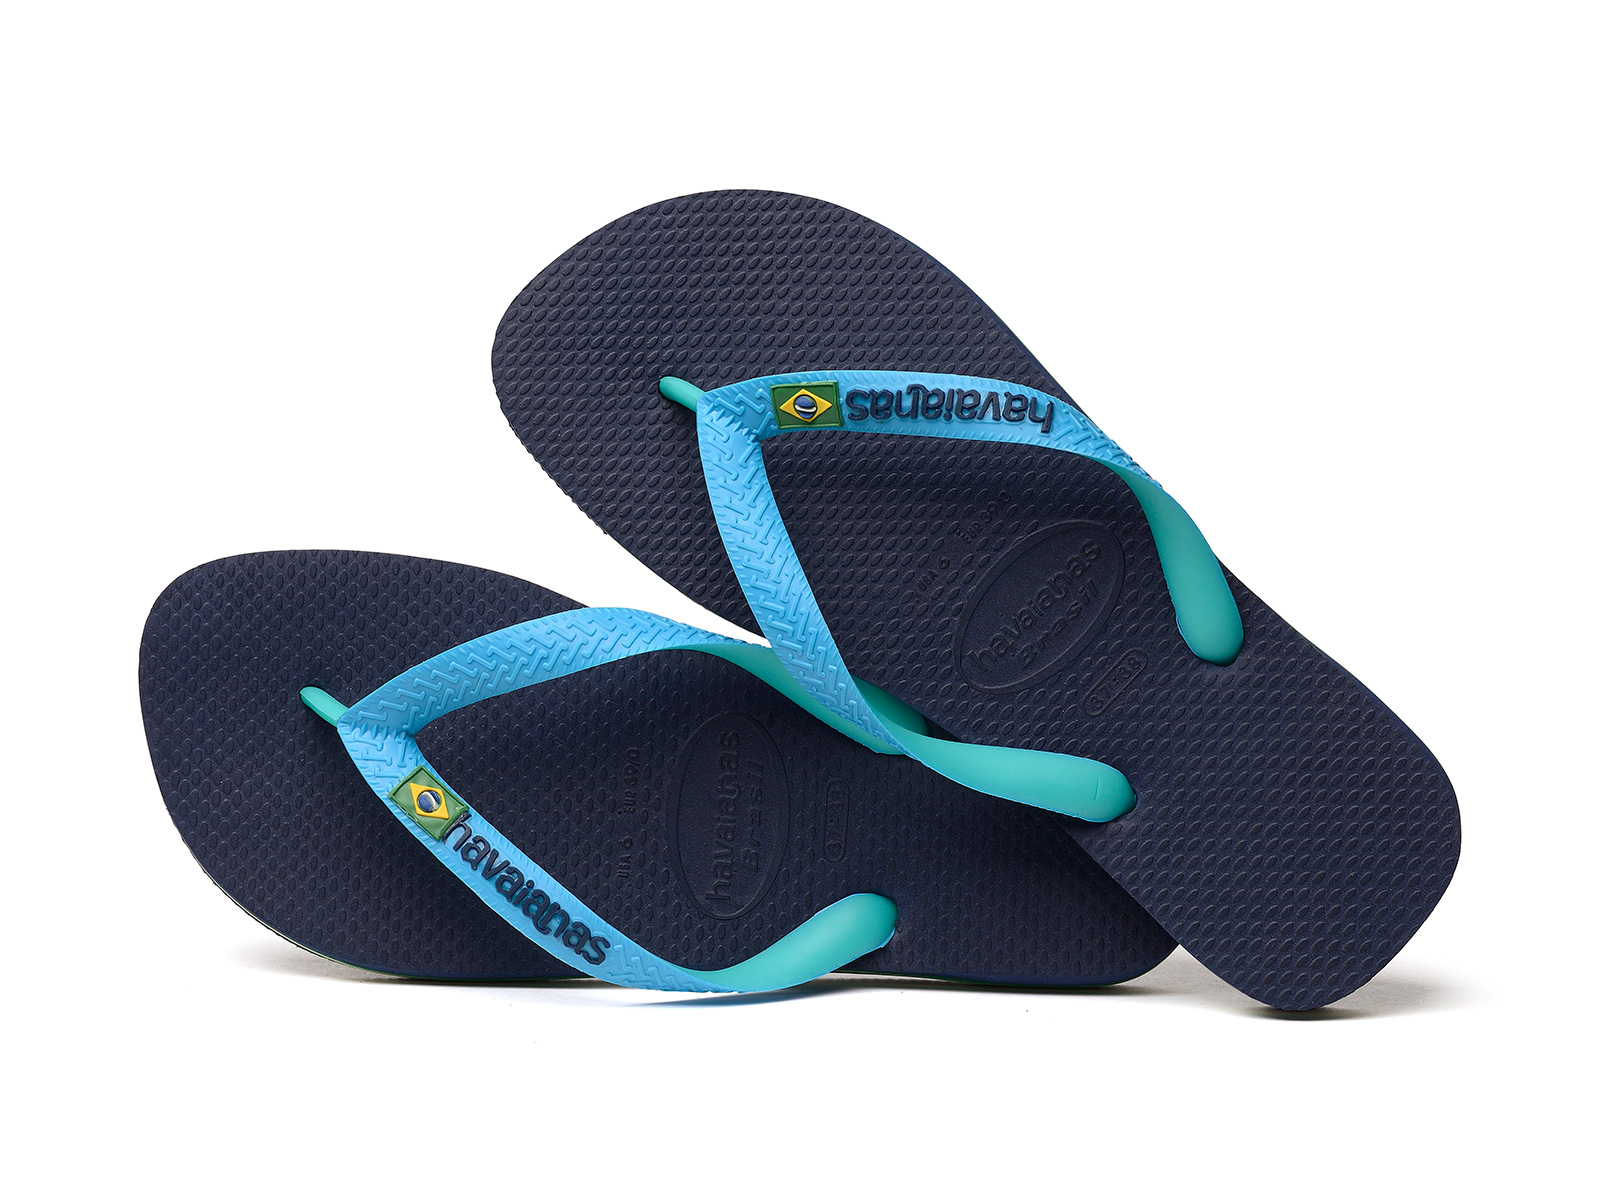 Two-toned Flip Flops Featuring A Navy Blue Footbed And Turquoise Straps ...